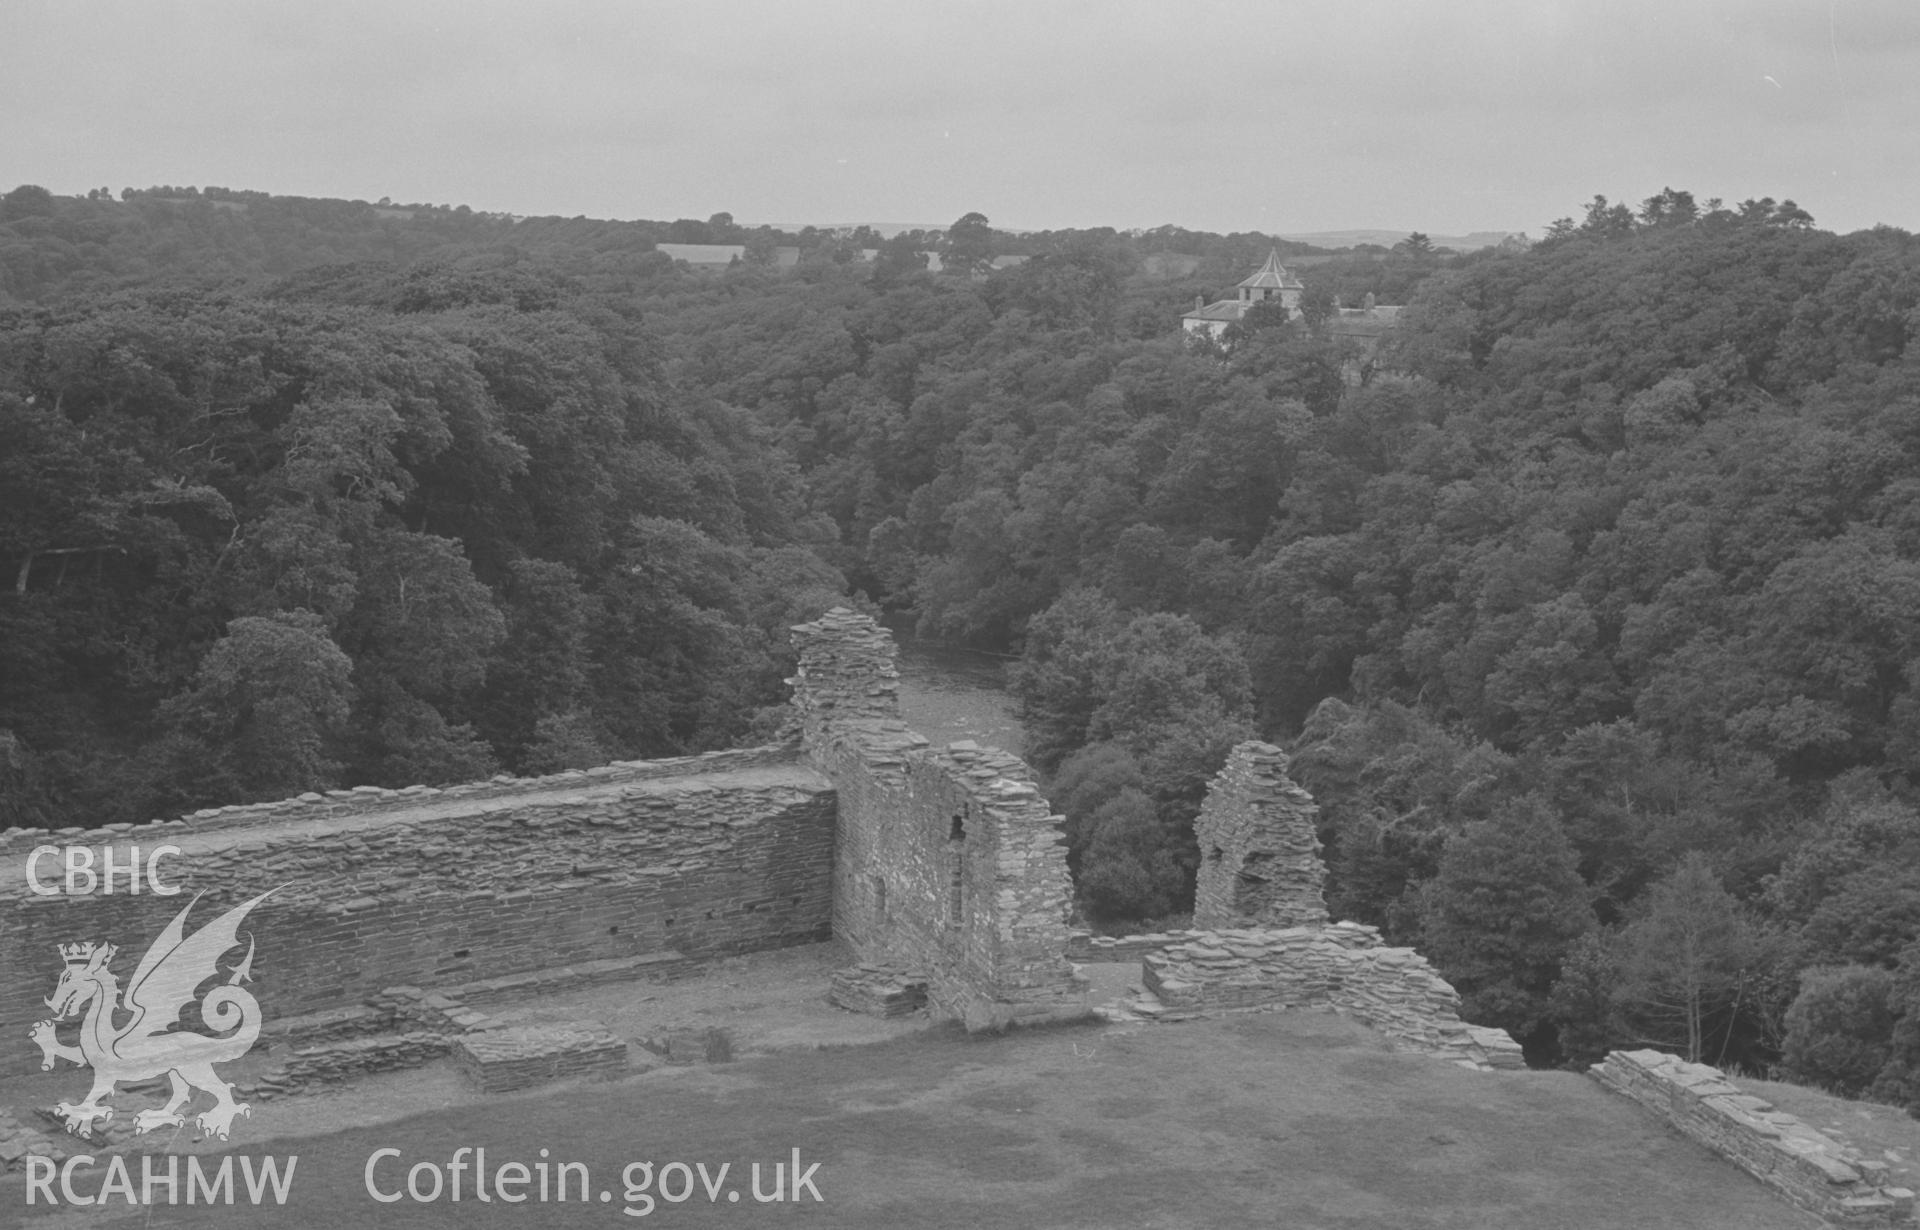 Digital copy of a black and white negative showing view of Coedmor House from Cilgerran castle. Photographed in September 1963 by Arthur O. Chater from Grid Reference SN 1952 4313, looking north.